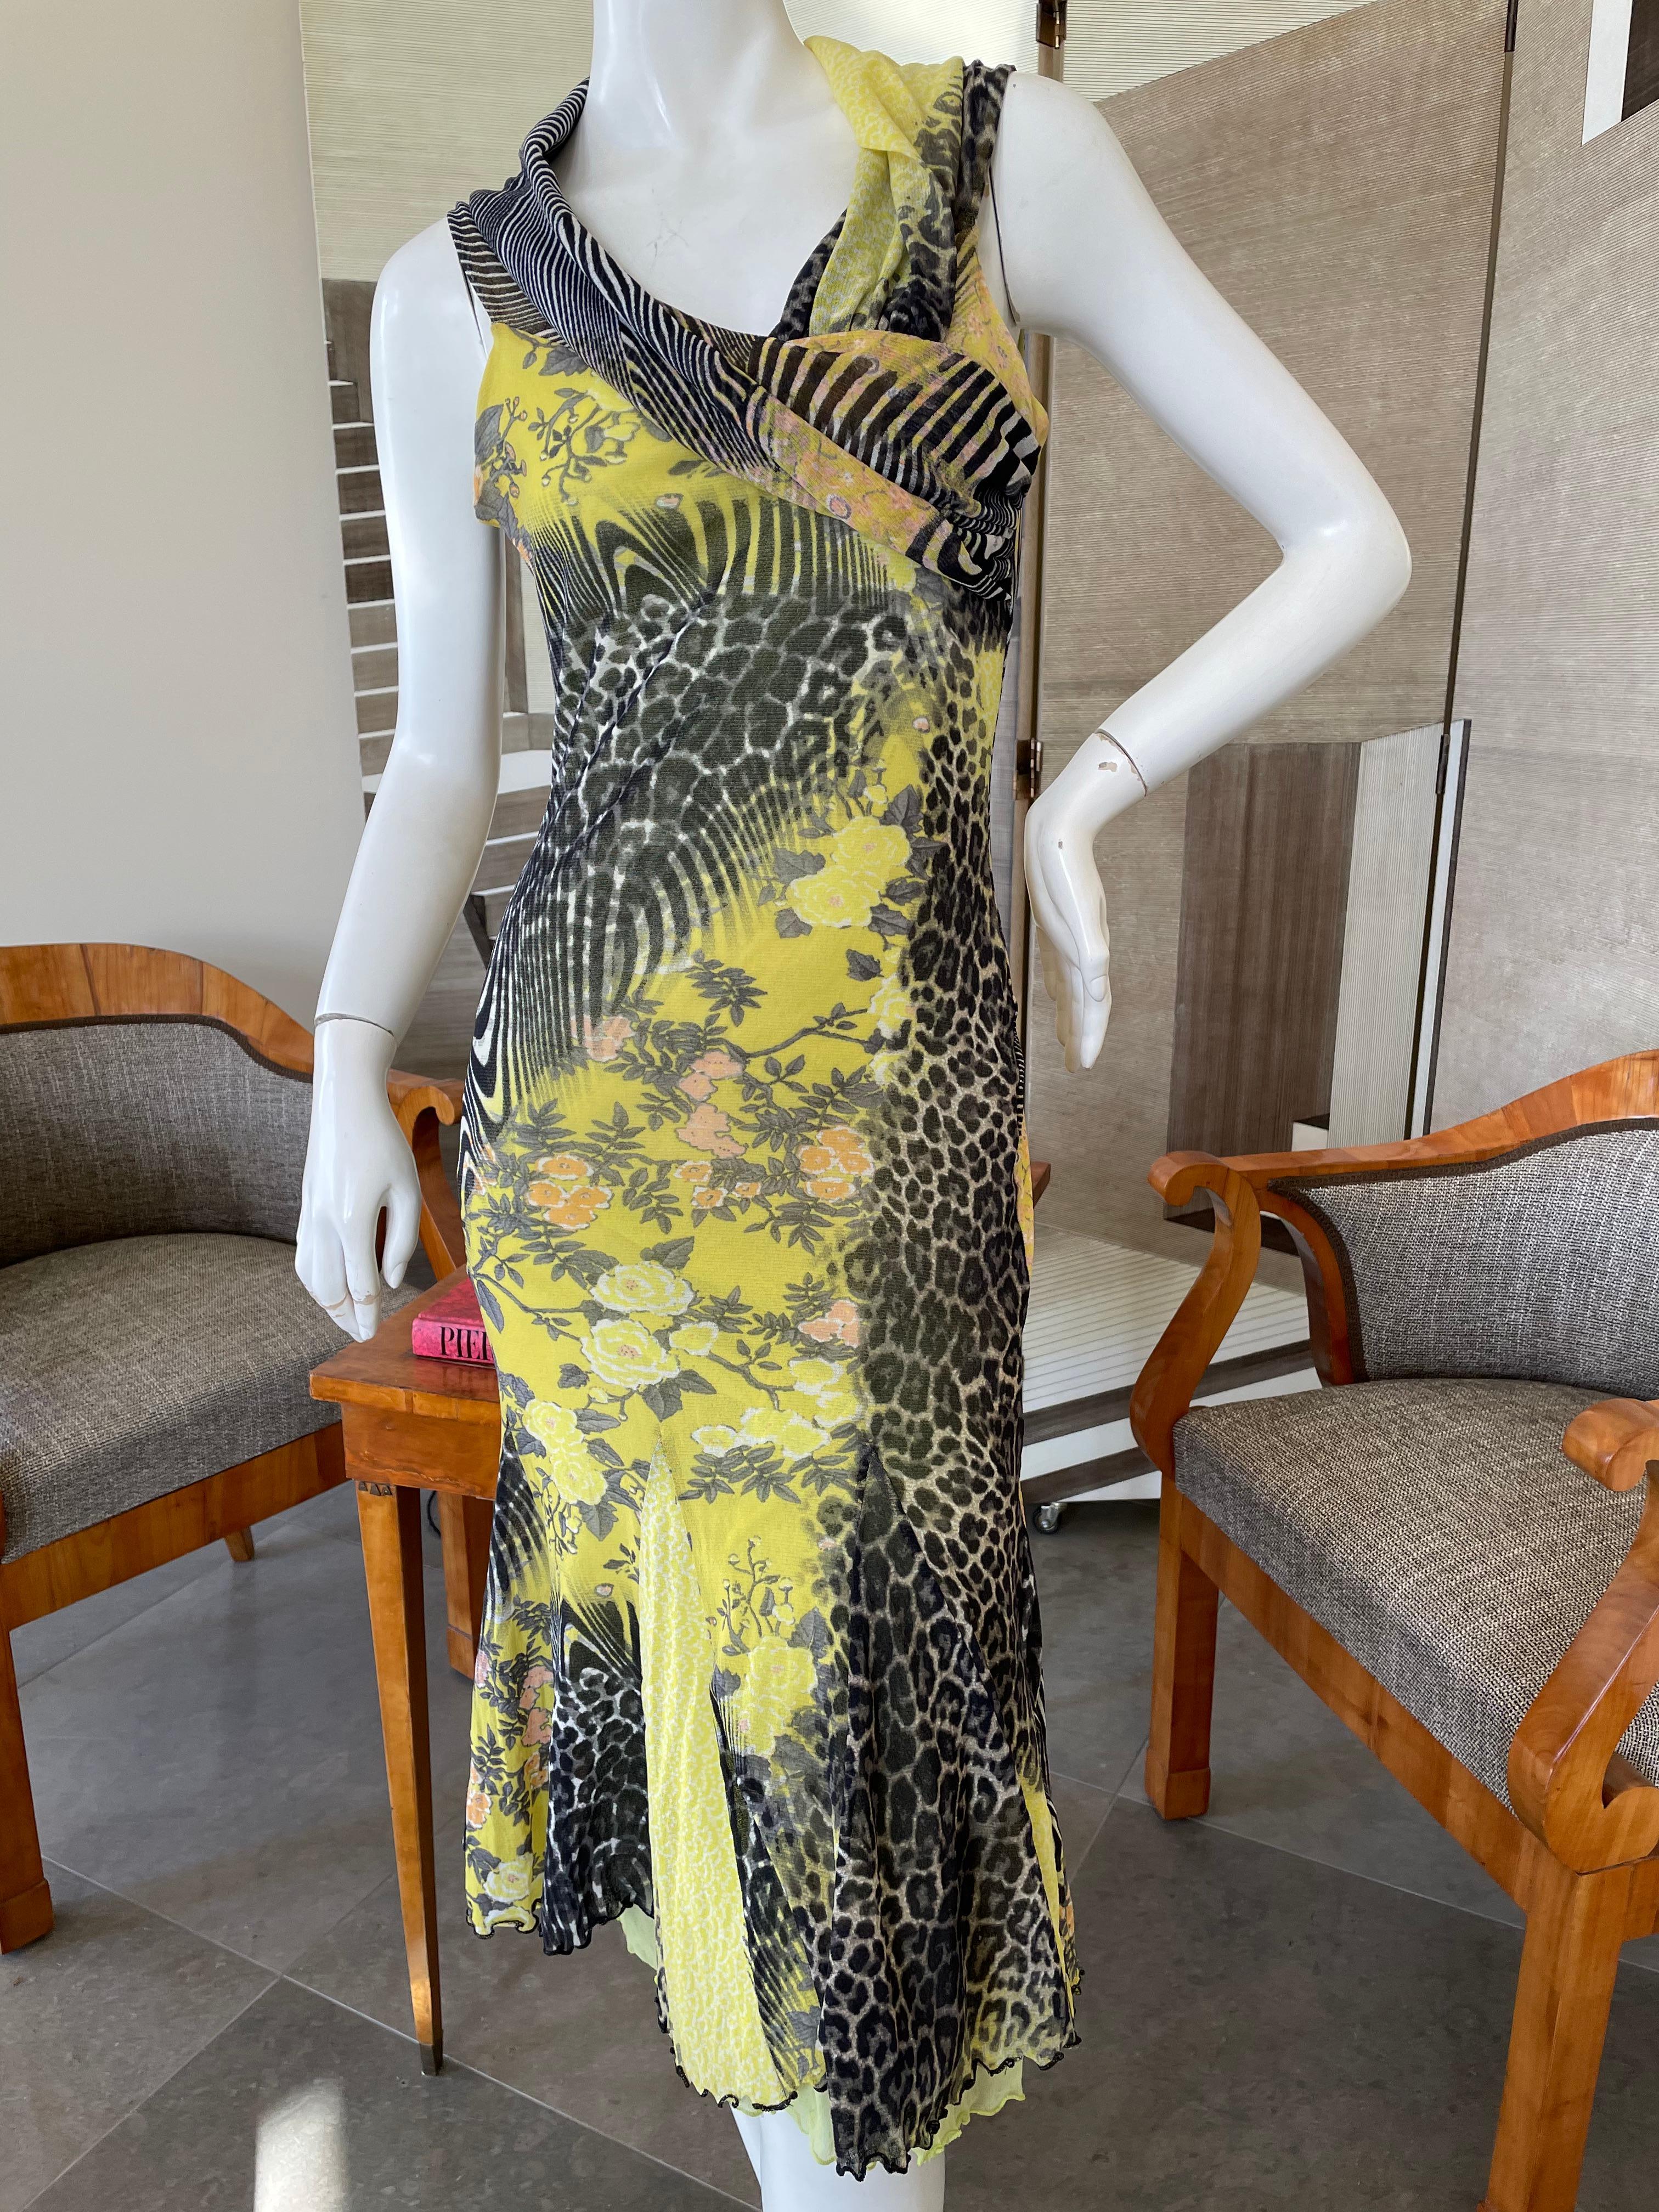 Roberto Cavalli for Class Cavalli Colorful Vintage Mesh Backless Dress.
Size 46
 Bust 38